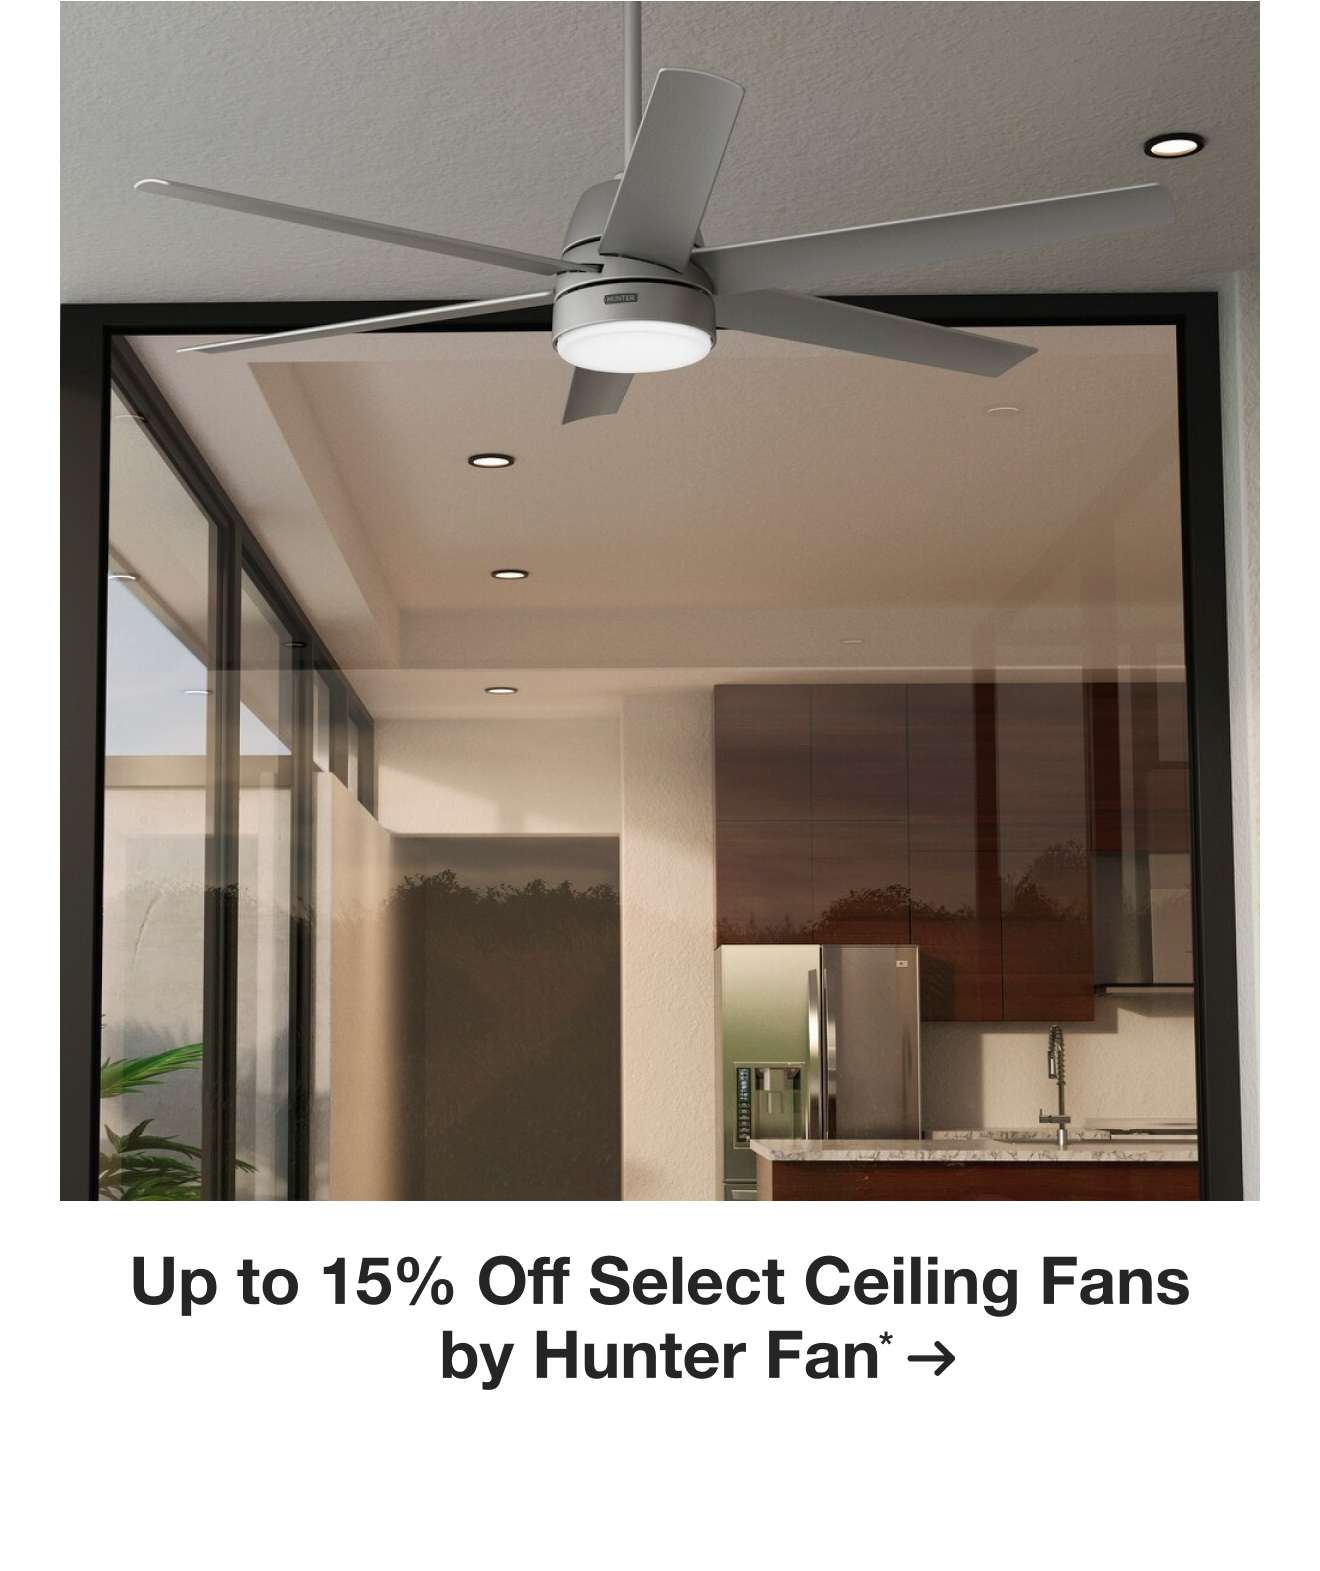 Up to 15% Off Select Ceiling Fans by Hunter Fan*